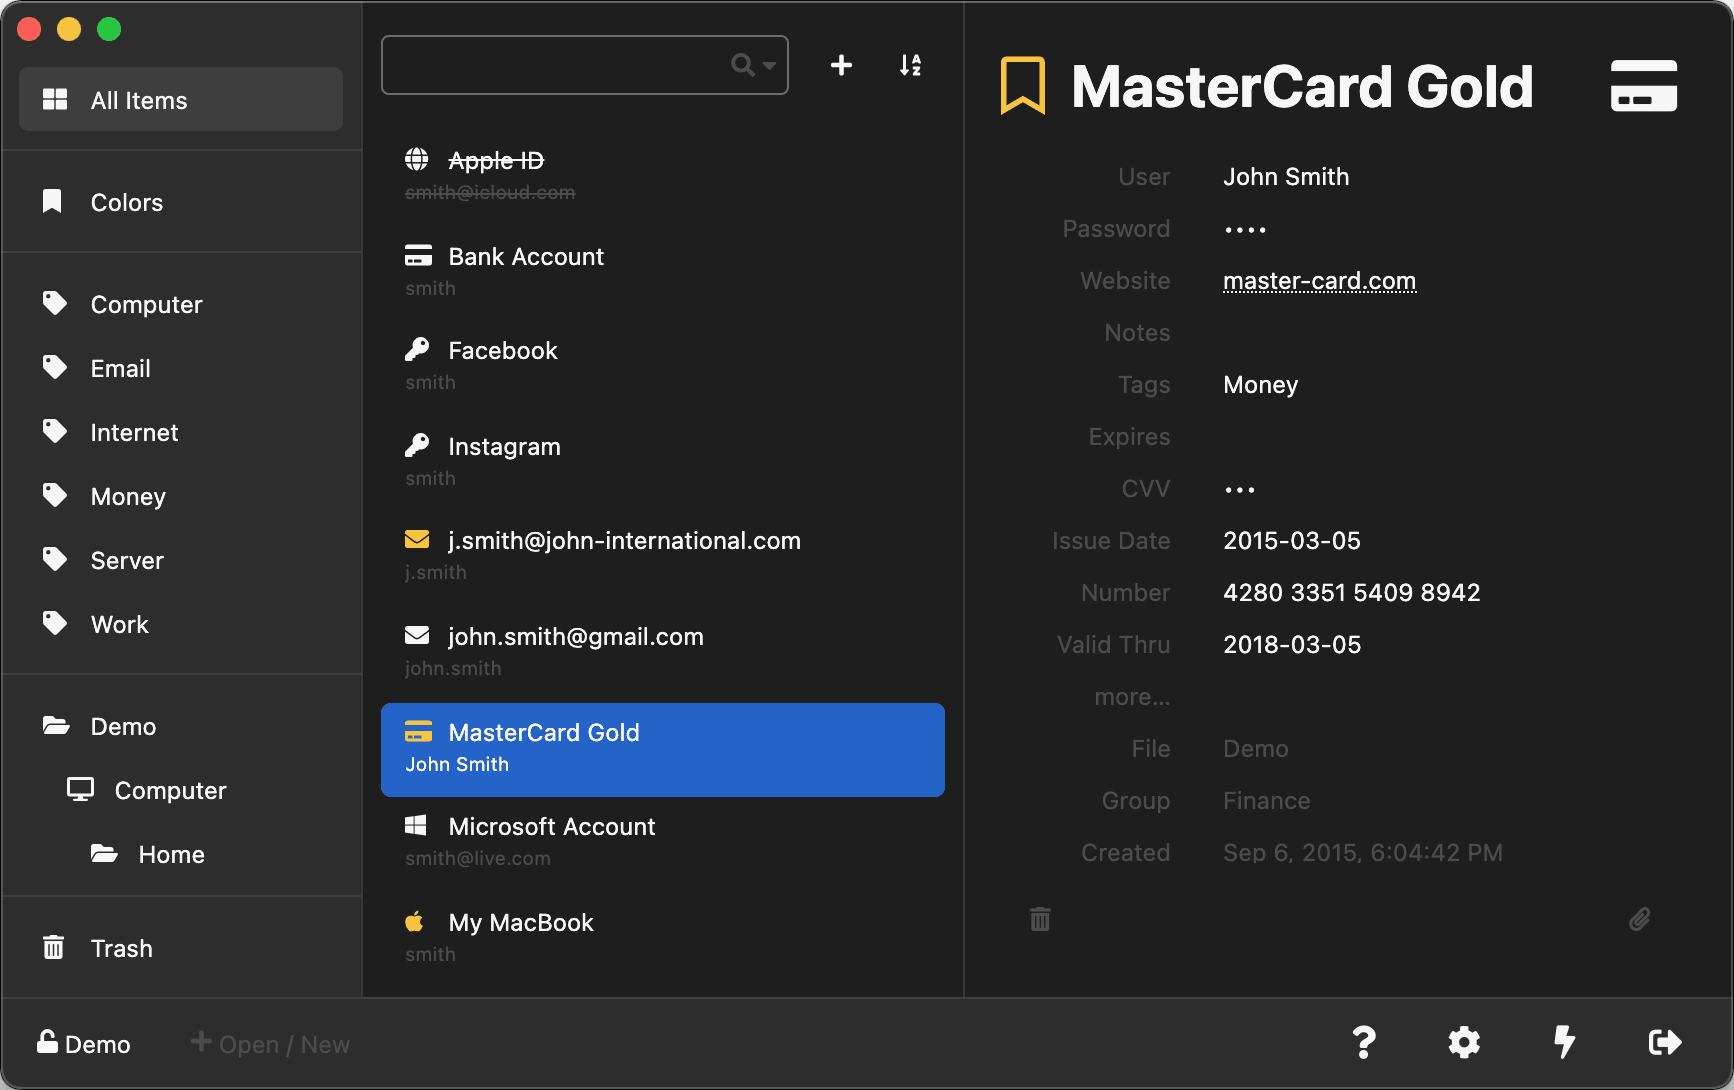 password manager for windows mac android and linux